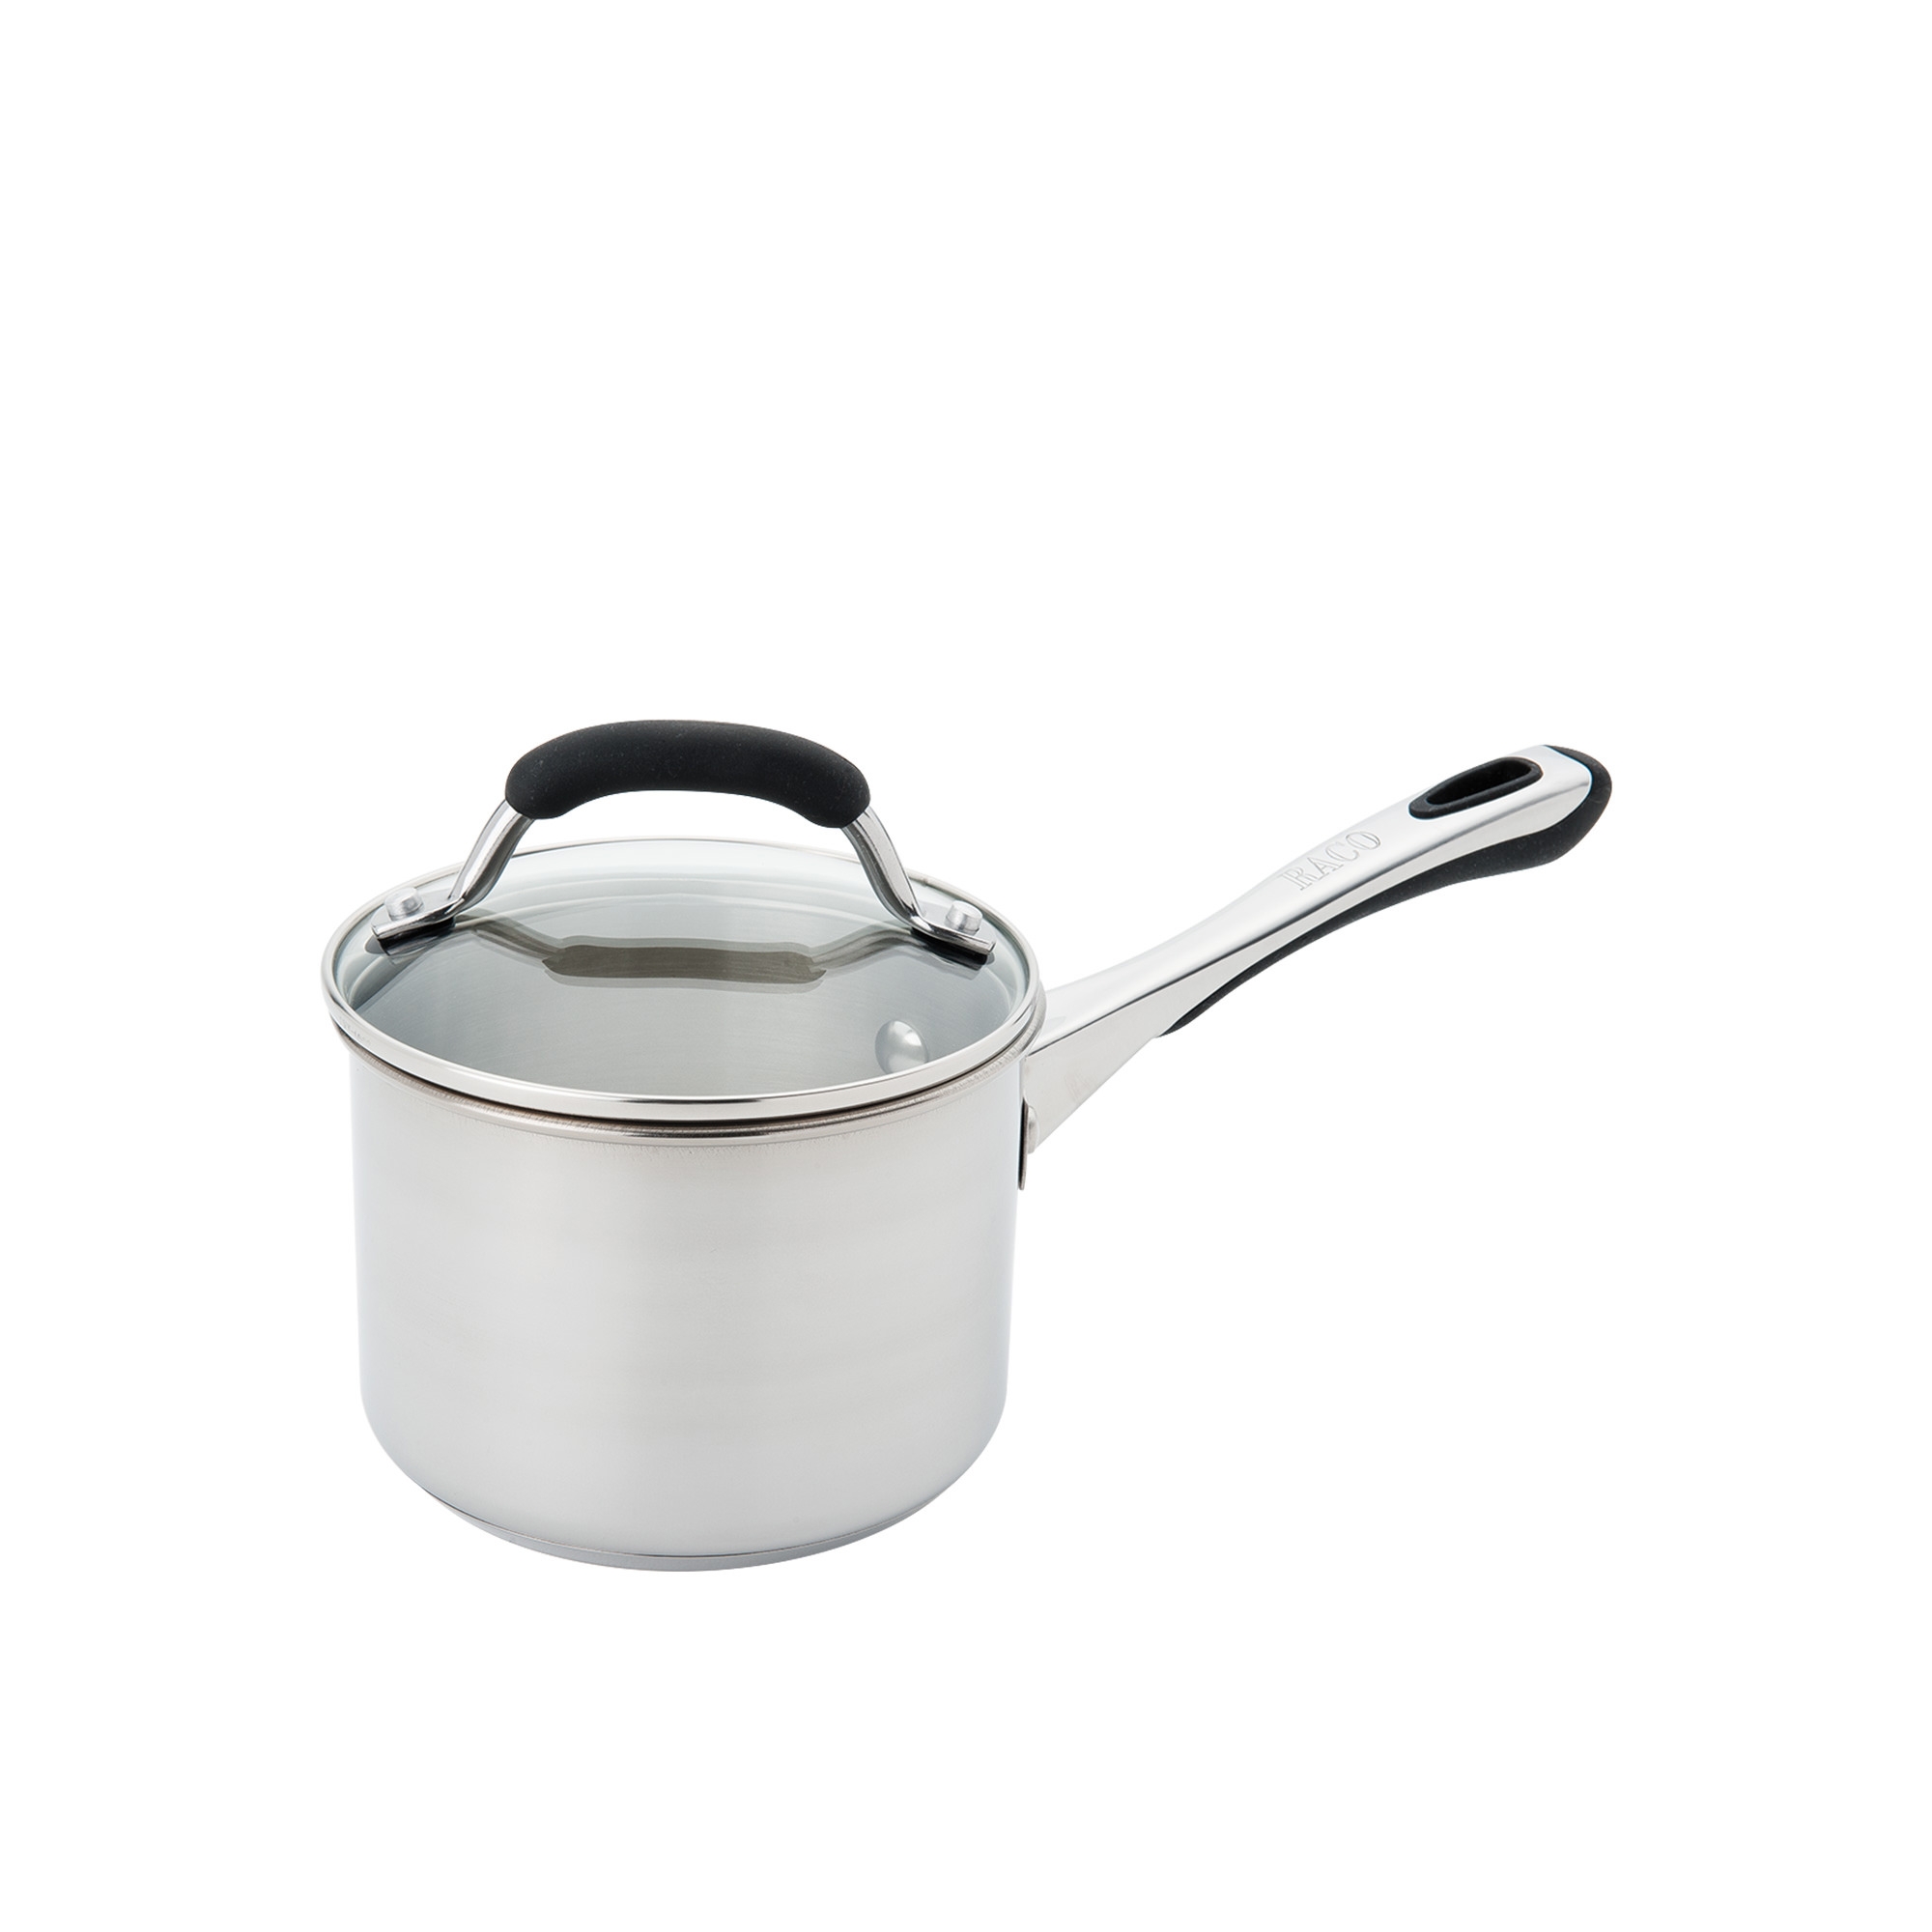 Raco Contemporary Stainless Steel Saucepan 18cm - 2.8L Image 1